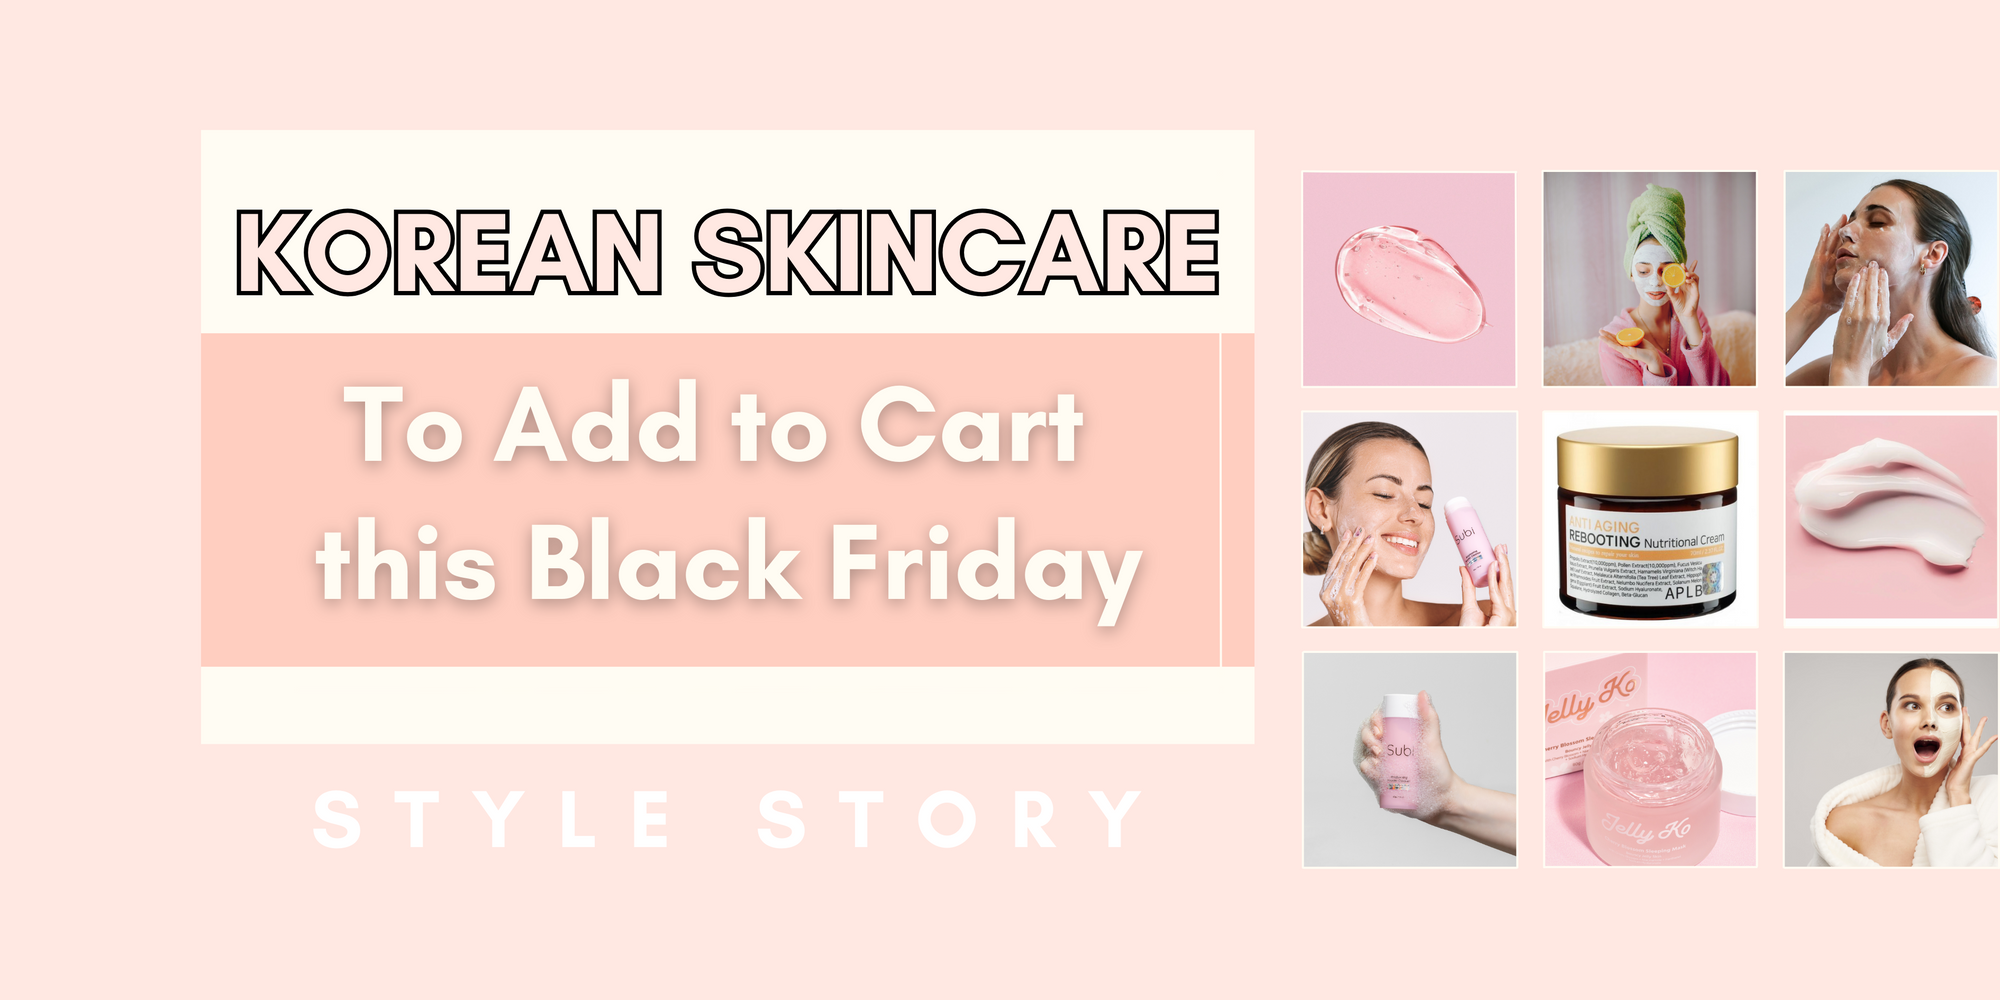 Korean Skincare To Add to Cart this Black Friday